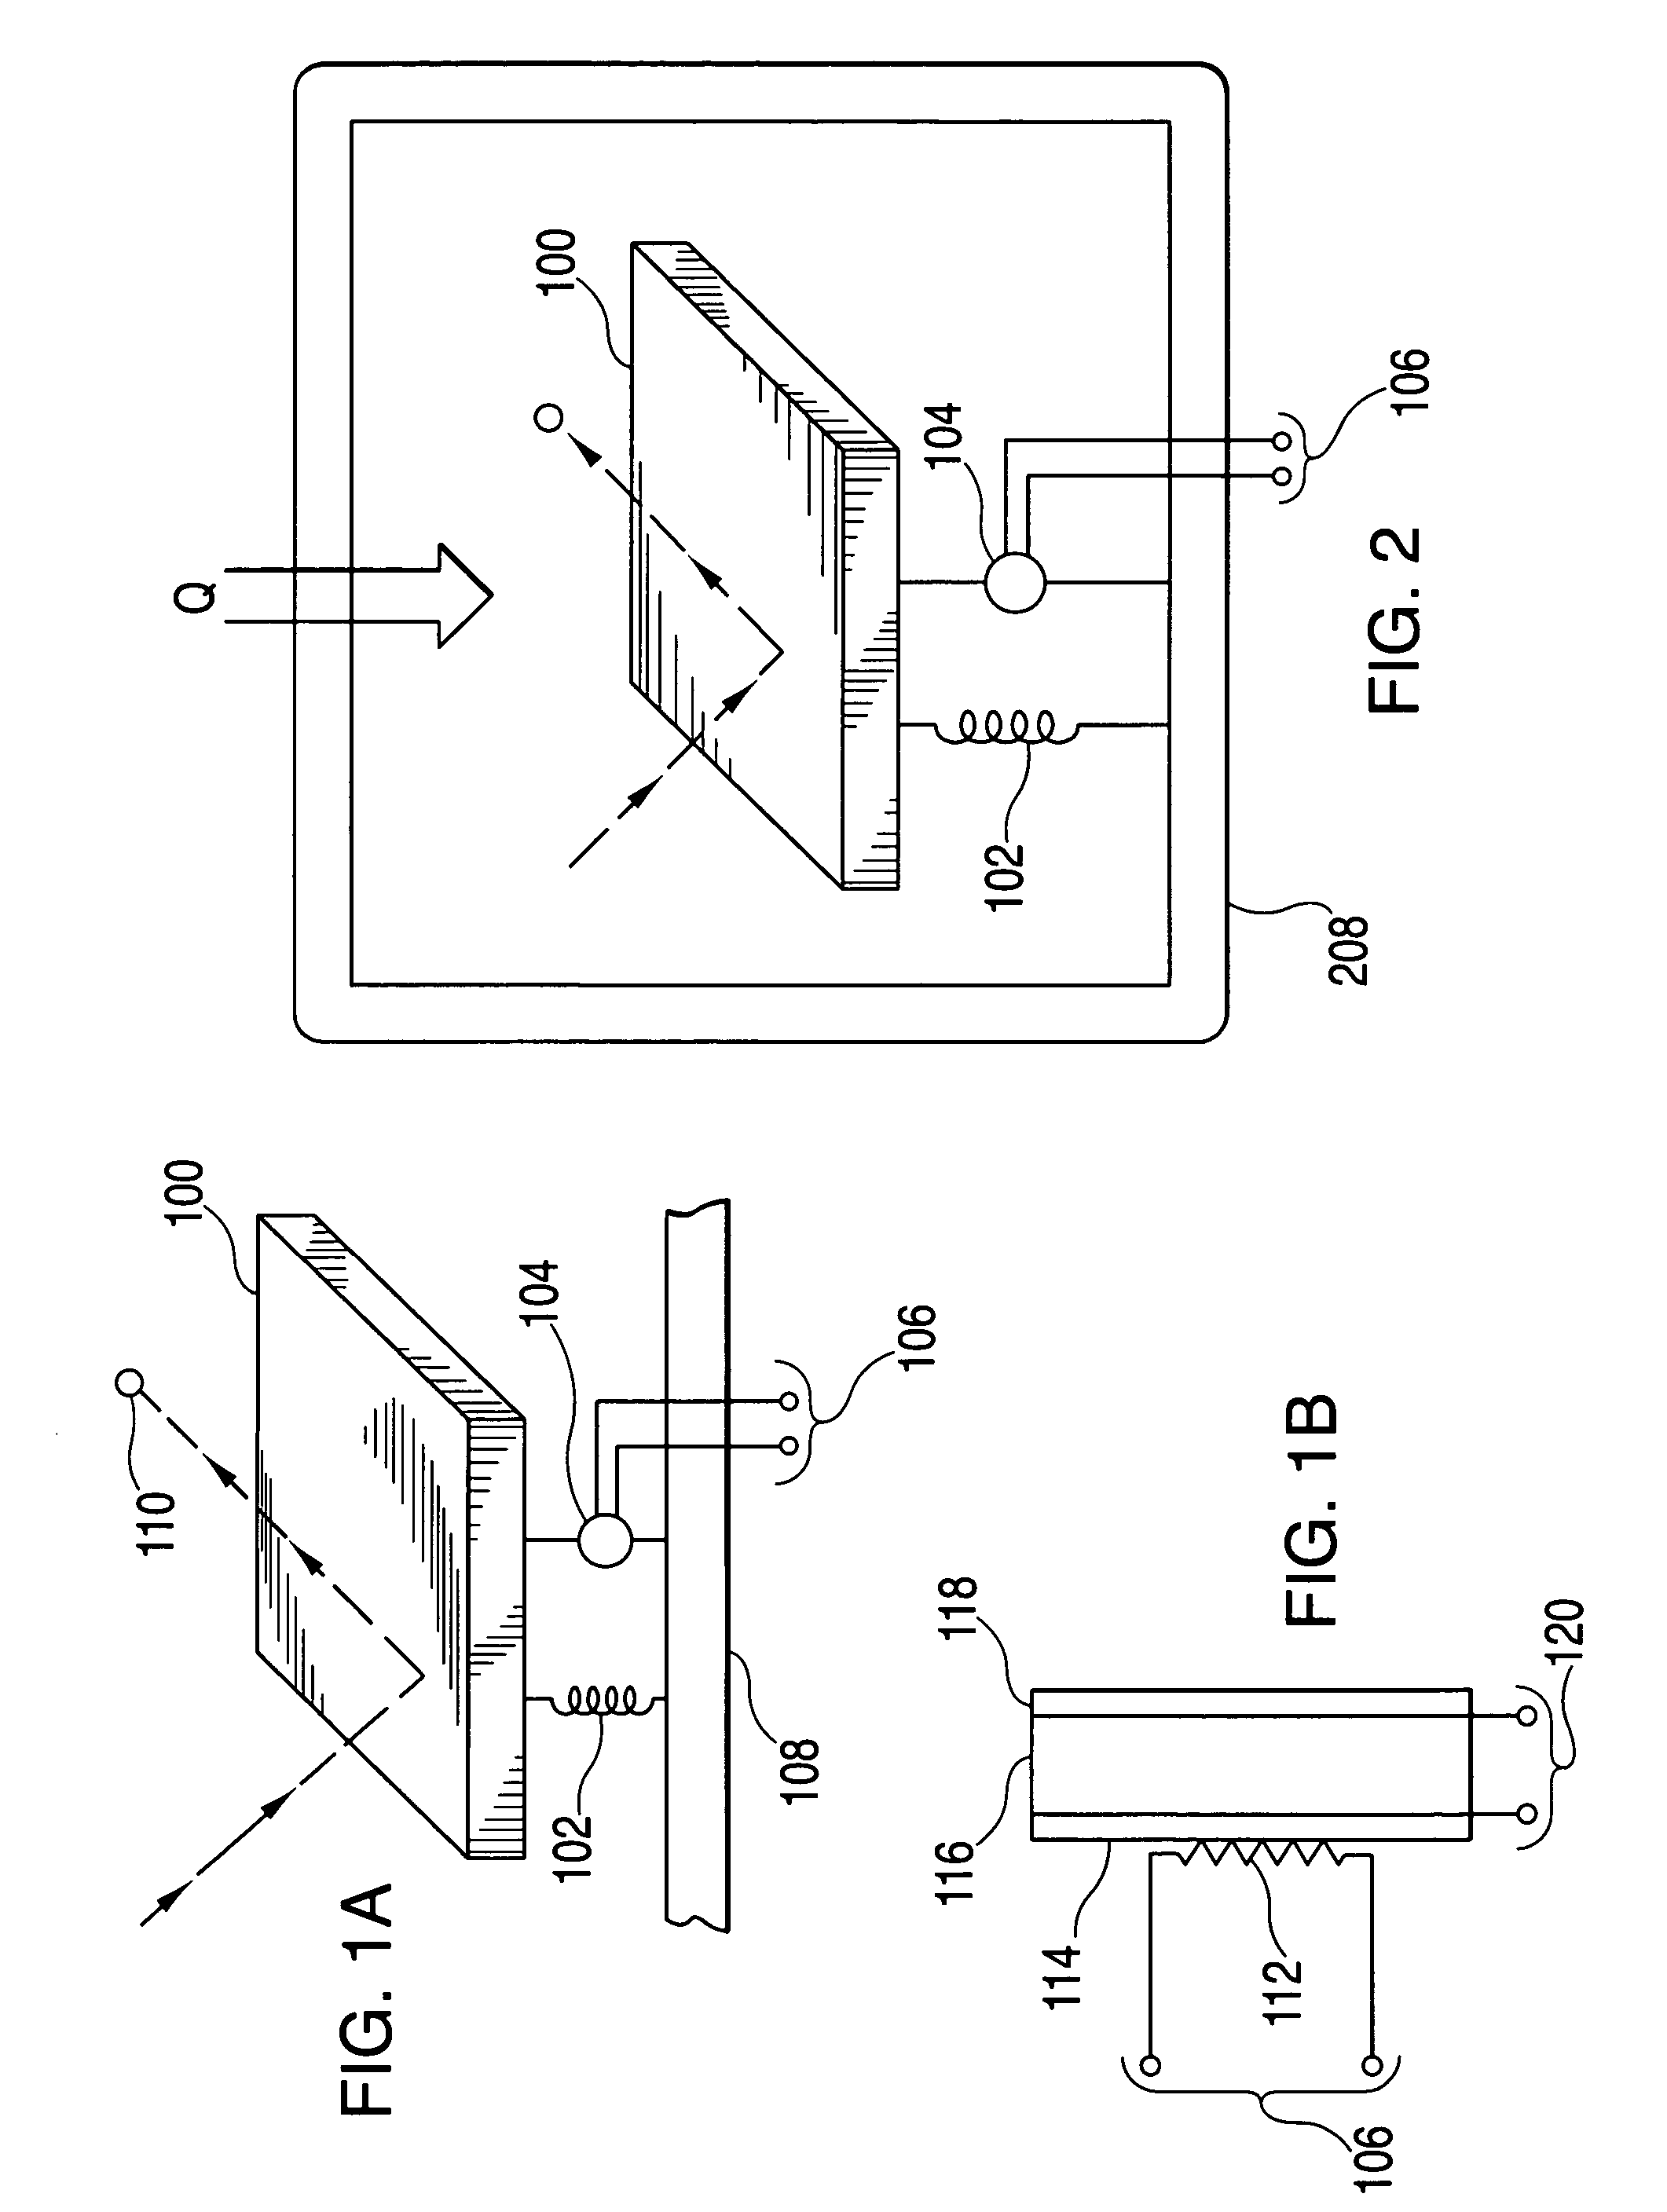 Energy conversion systems utilizing parallel array of automatic switches and generators